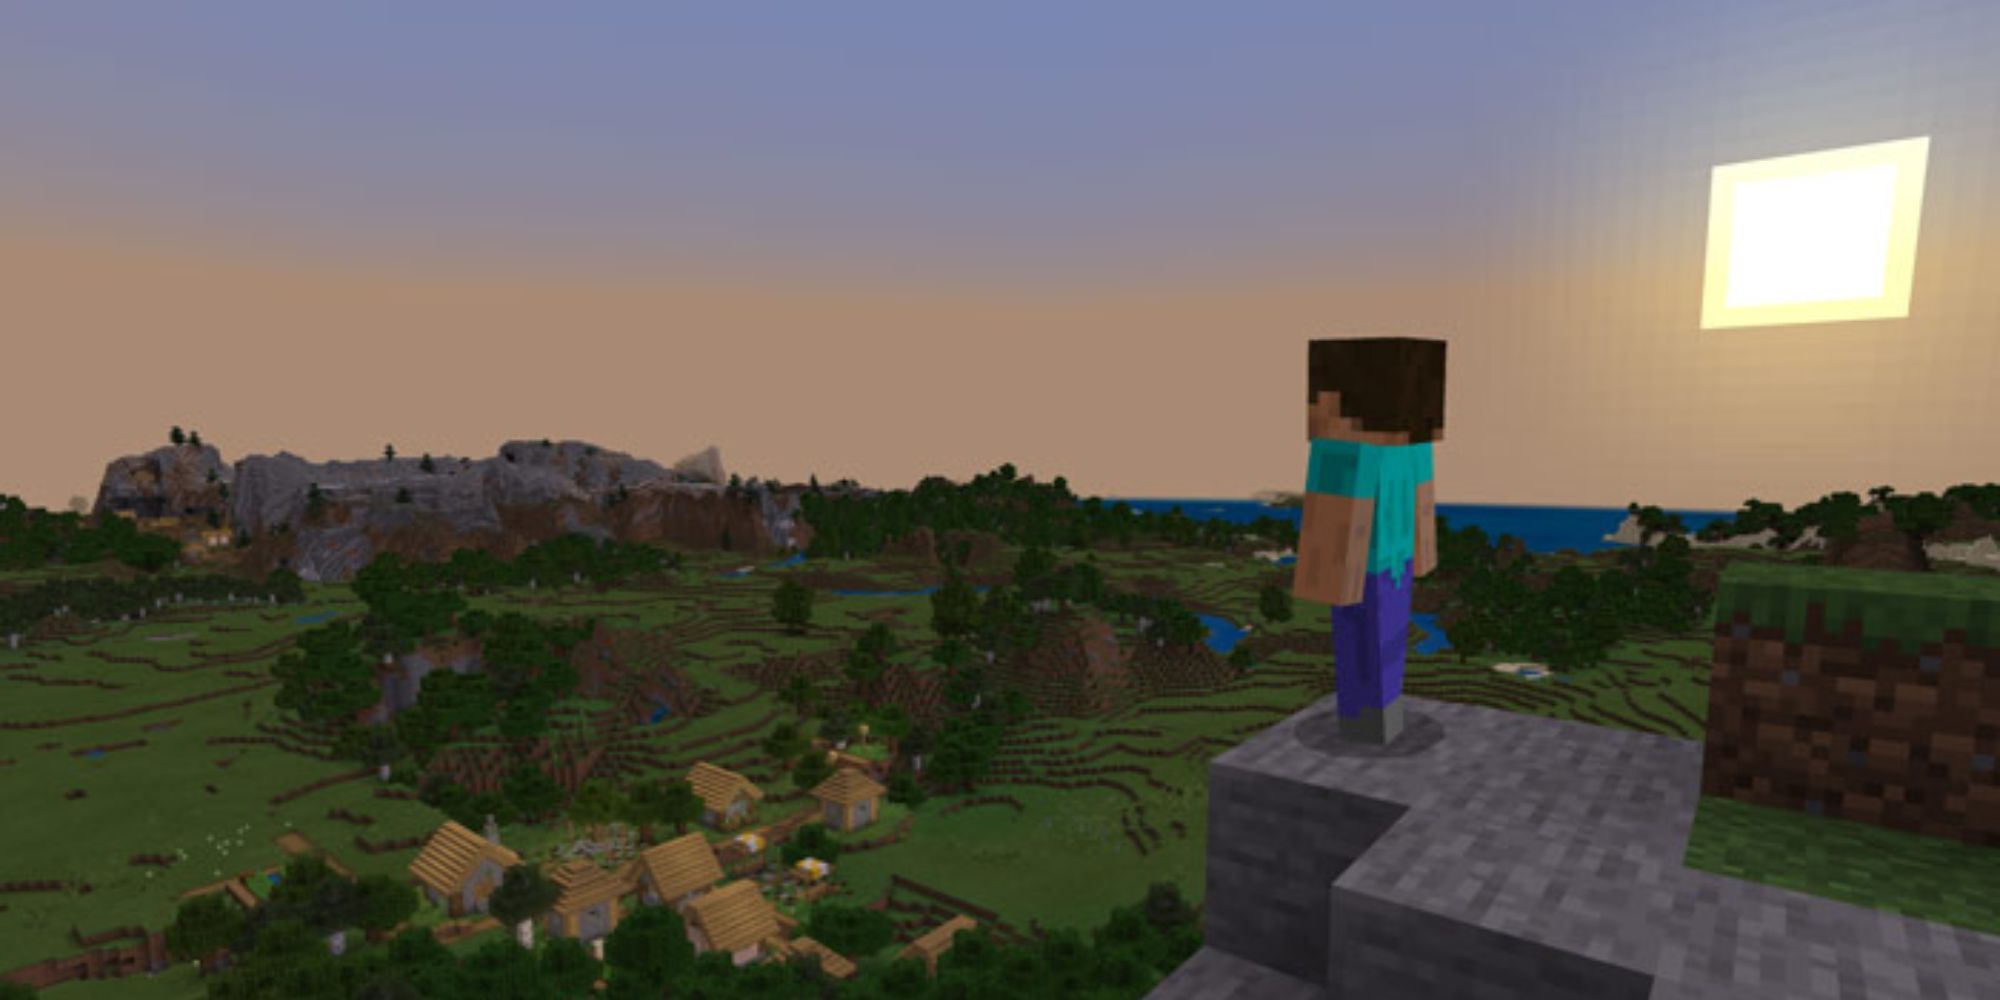 Steve stands on a rocky ledge overlooking a village 